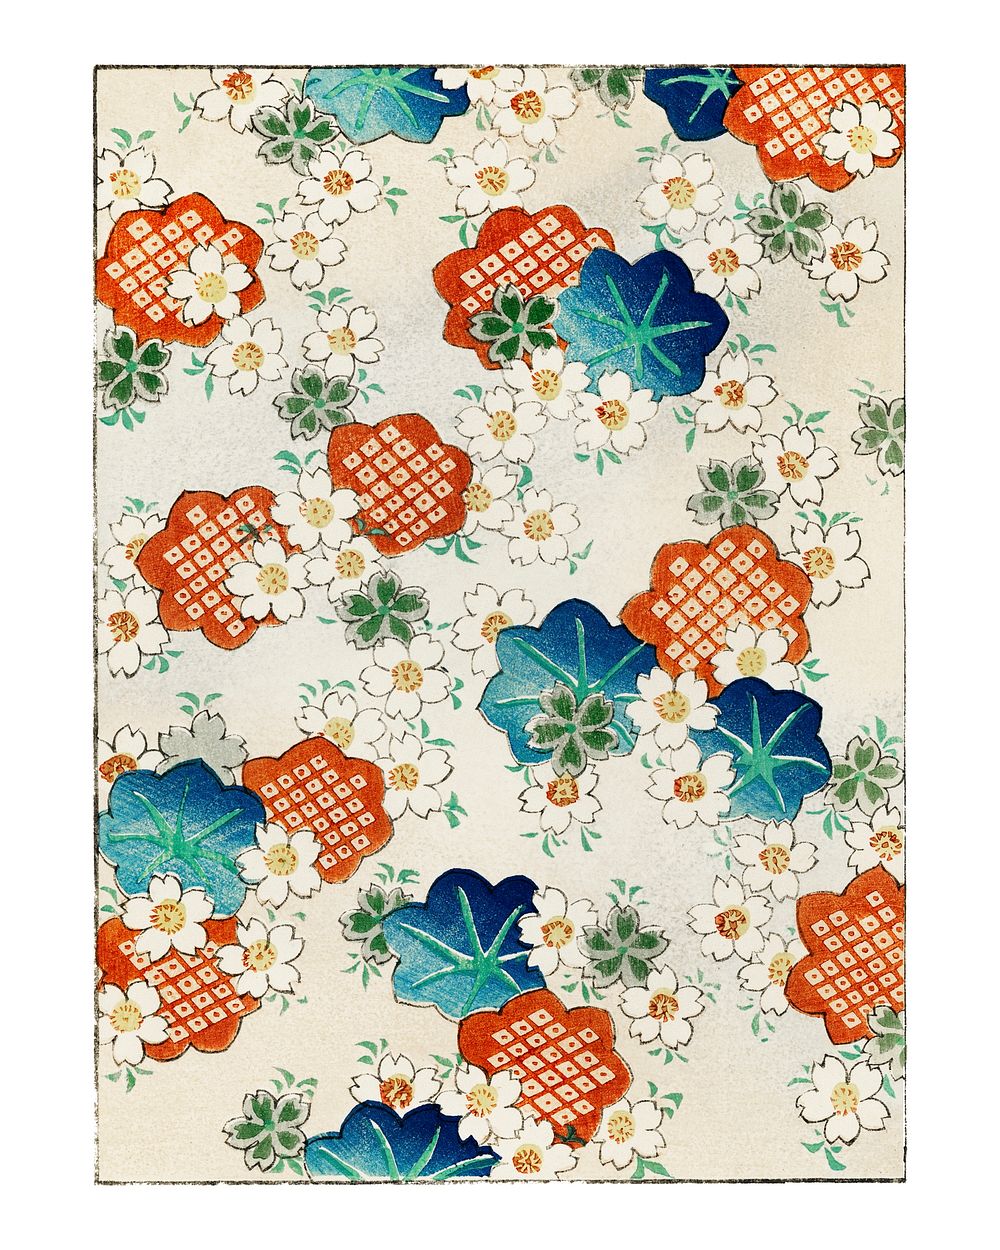 Floral pattern vintage illustration by Watanabe Seitei. Digitally enhanced by rawpixel.